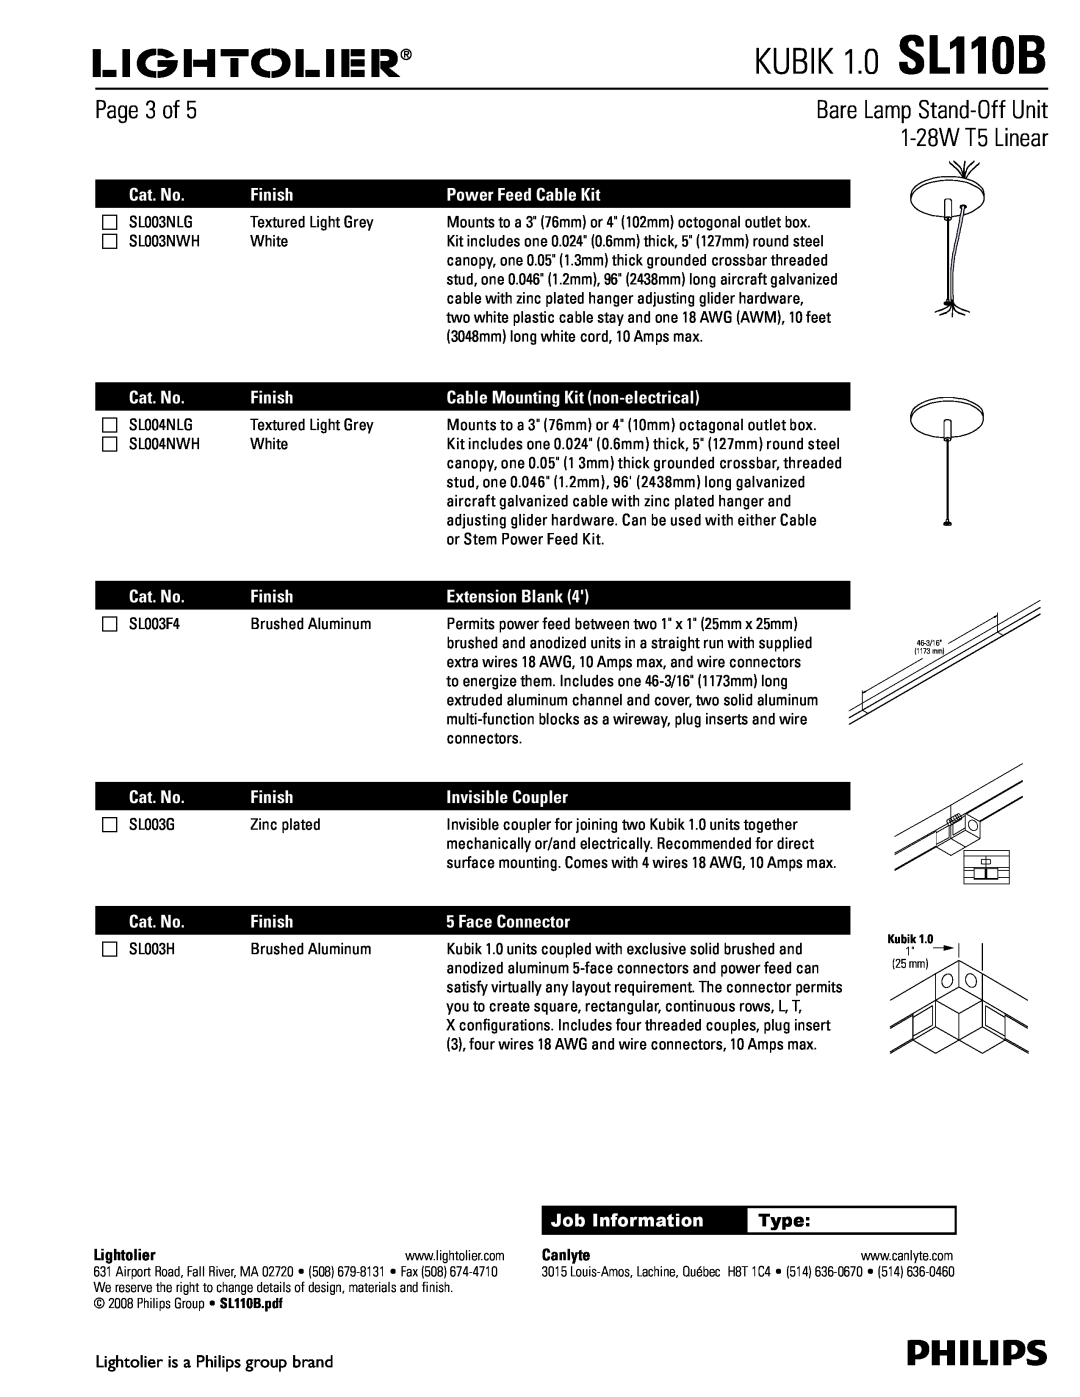 Lightolier dimensions Page 3 of, KUBIK 1.0 SL110B, Bare Lamp Stand-OffUnit, 1-28WT5 Linear, Type 